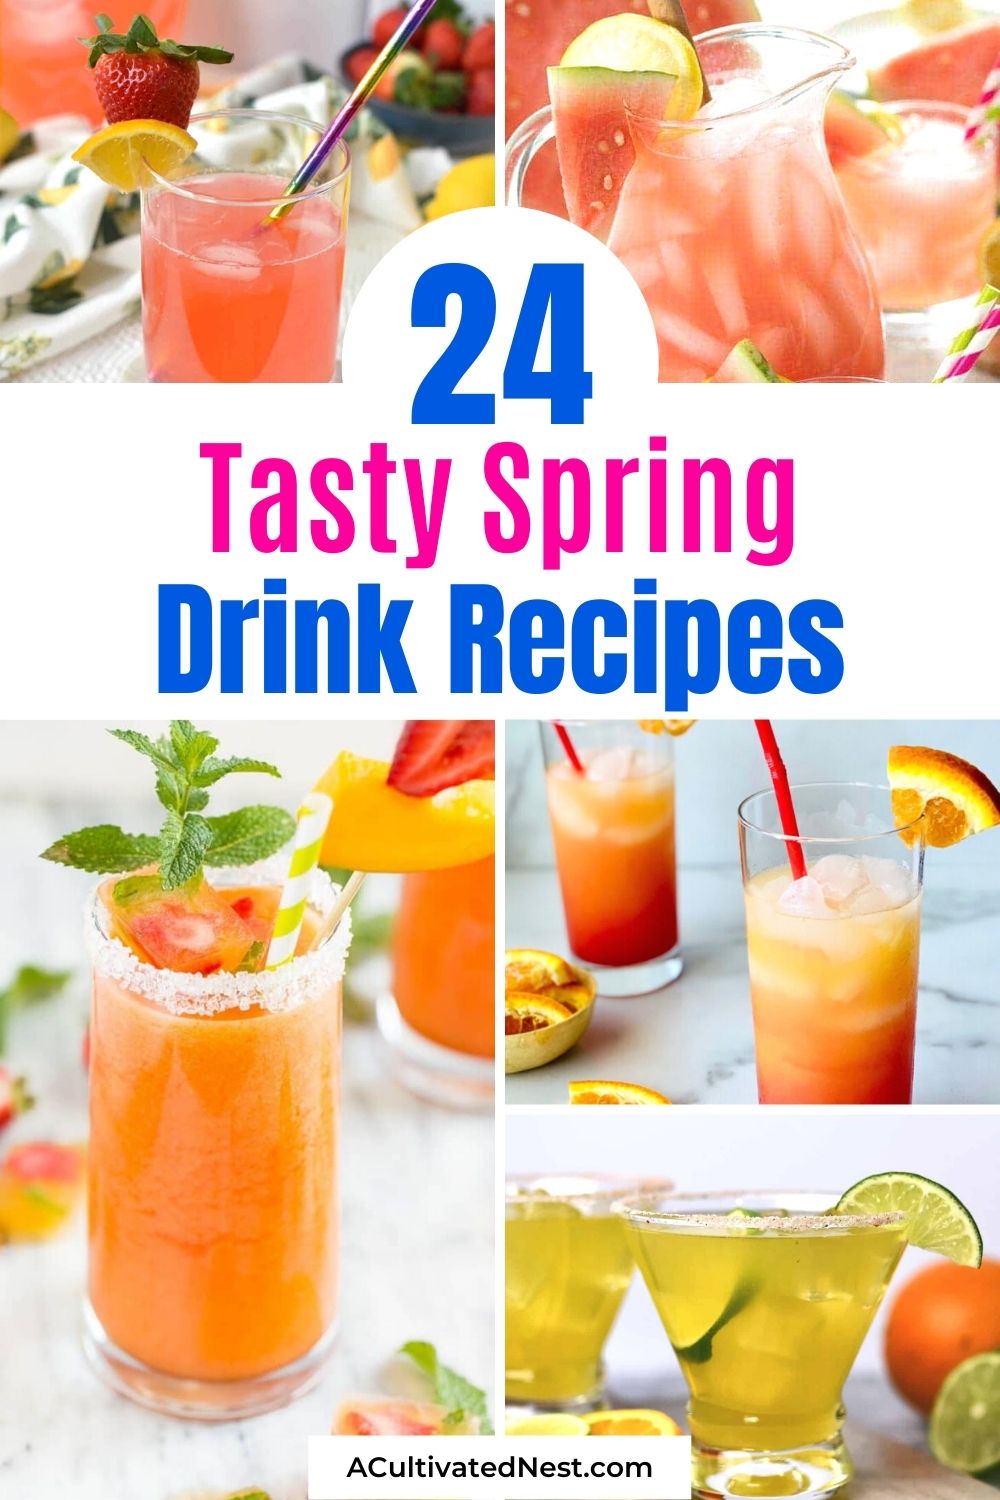 24 Tasty Spring Drink Recipes- You can celebrate the delicious fresh flavors of spring with some tasty spring drink recipes! Both alcoholic and nonalcoholic recipes are included for you to try! | #drinkRecipes #alcoholicDrinks #nonalcoholicDrinks #drinks #ACultivatedNest